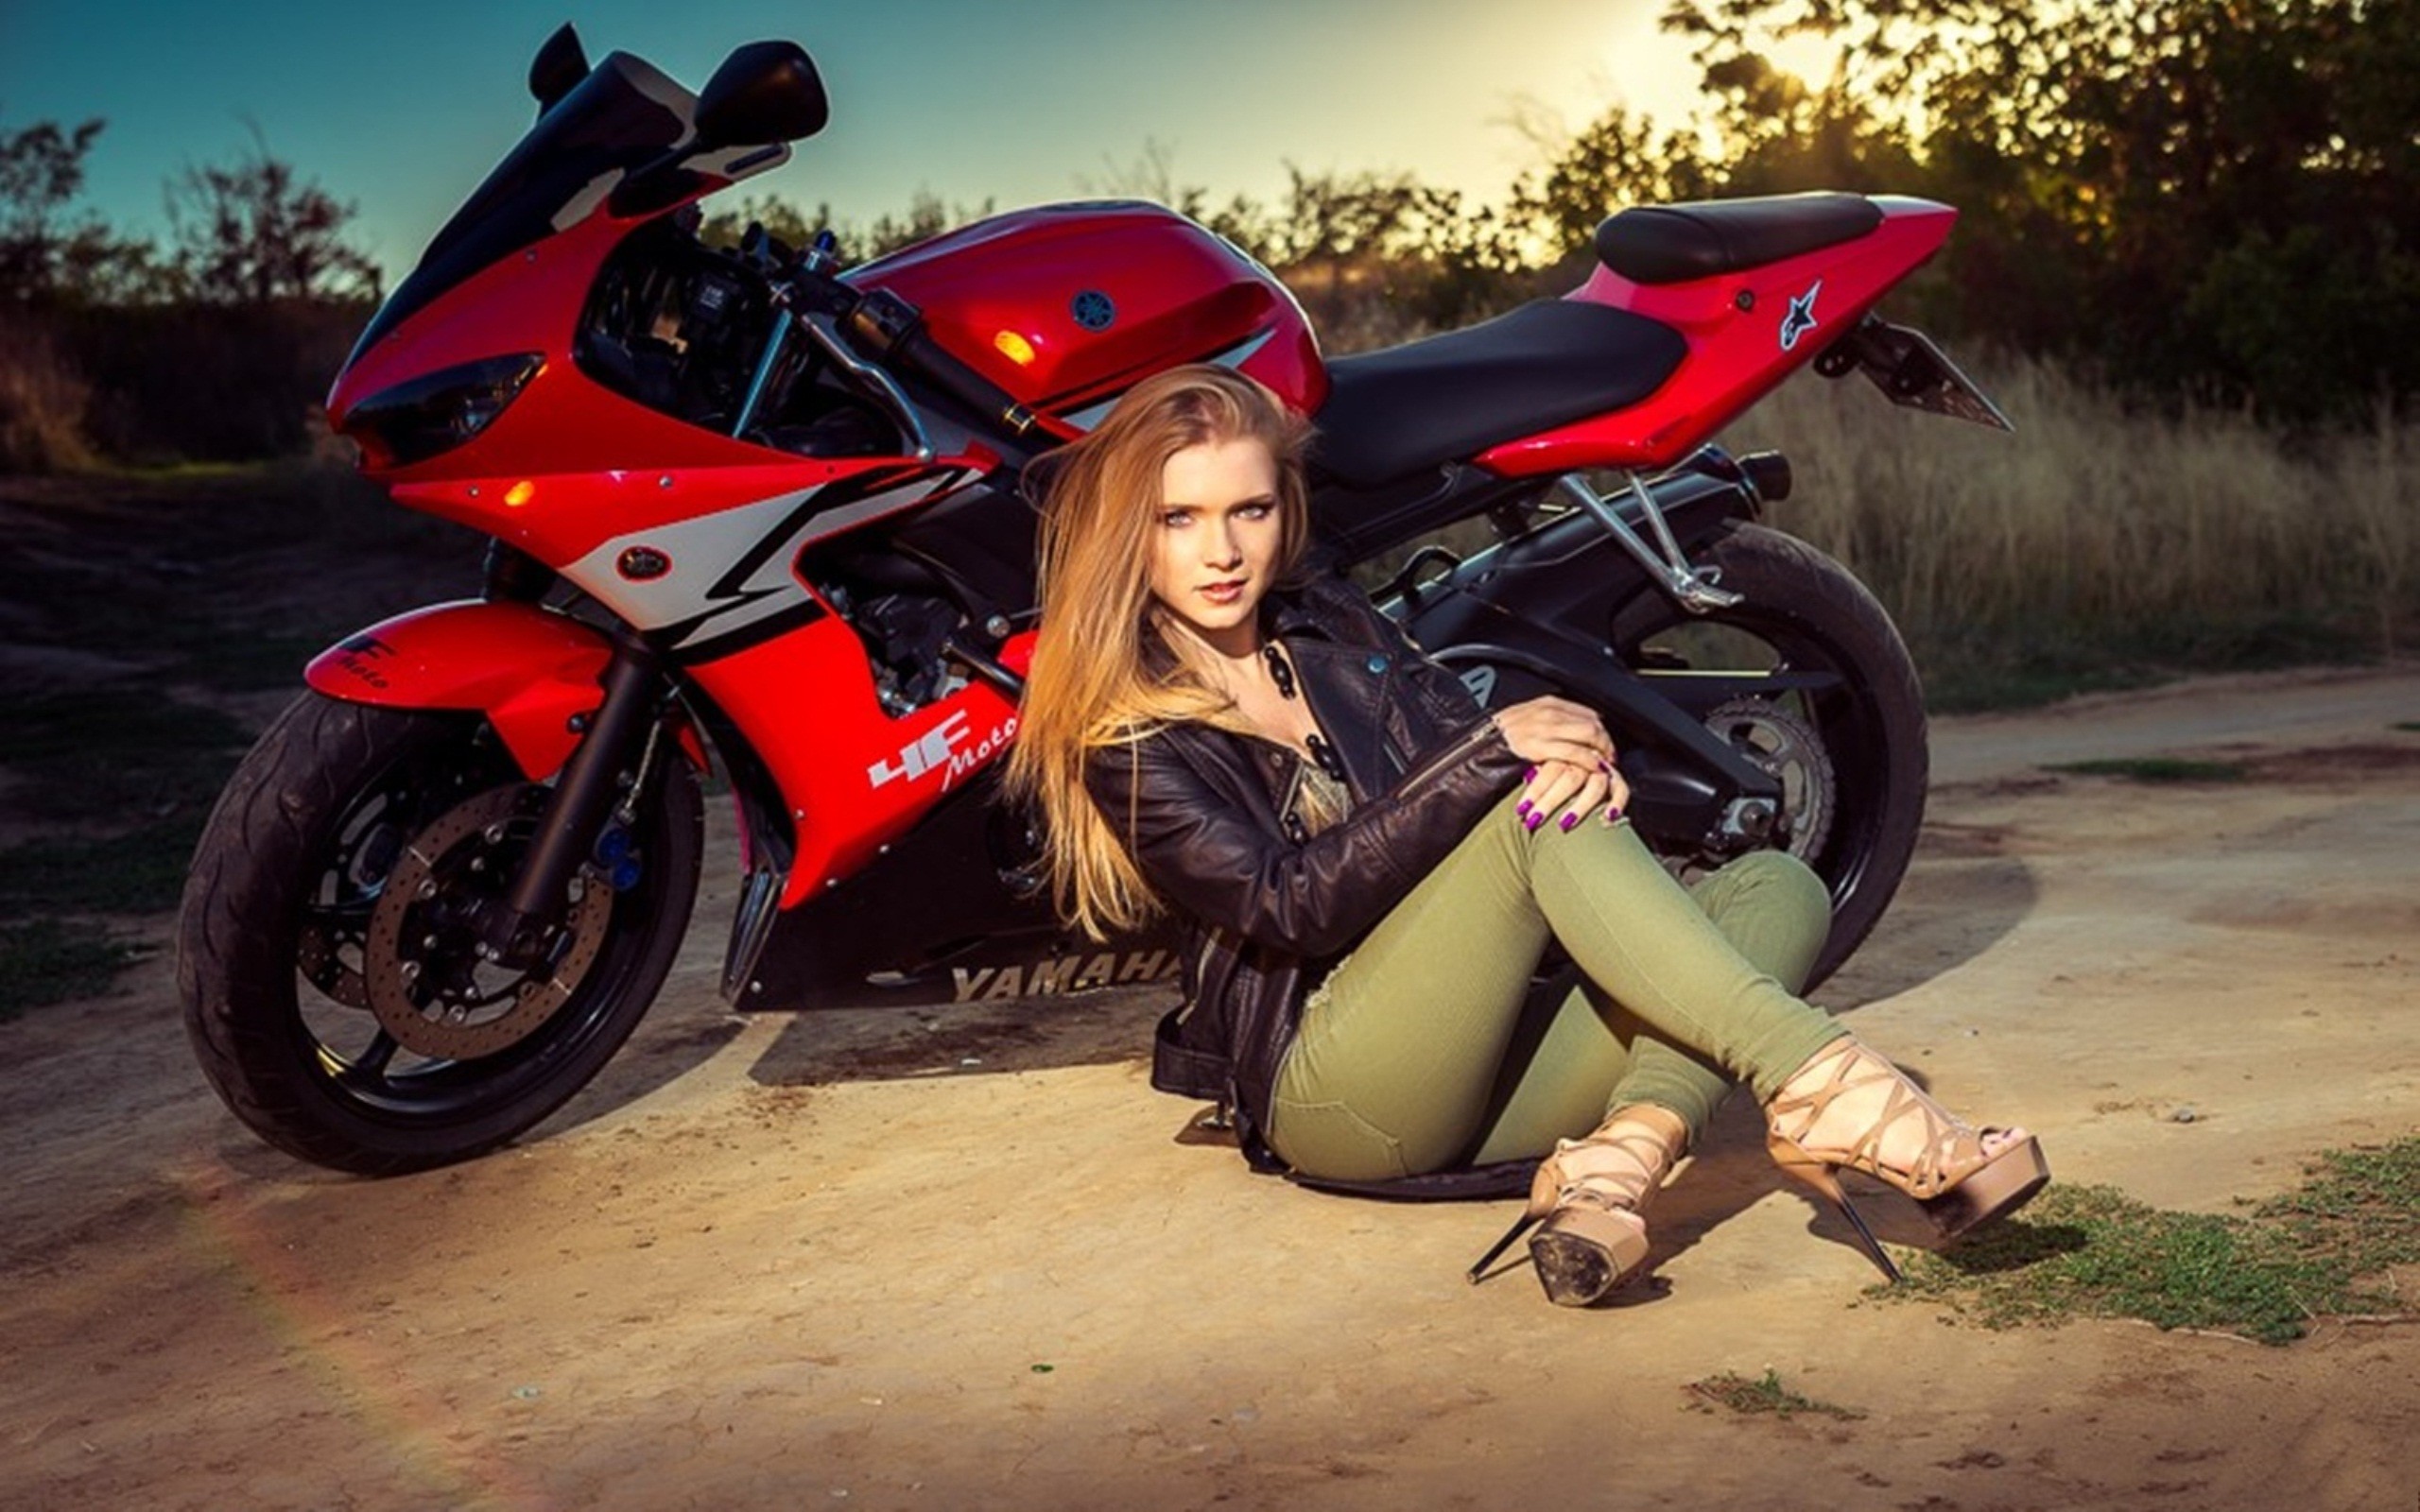 Hd Wallpapers Motorcycles And Girls 70 Images 34965 Hot Sex Picture 3997